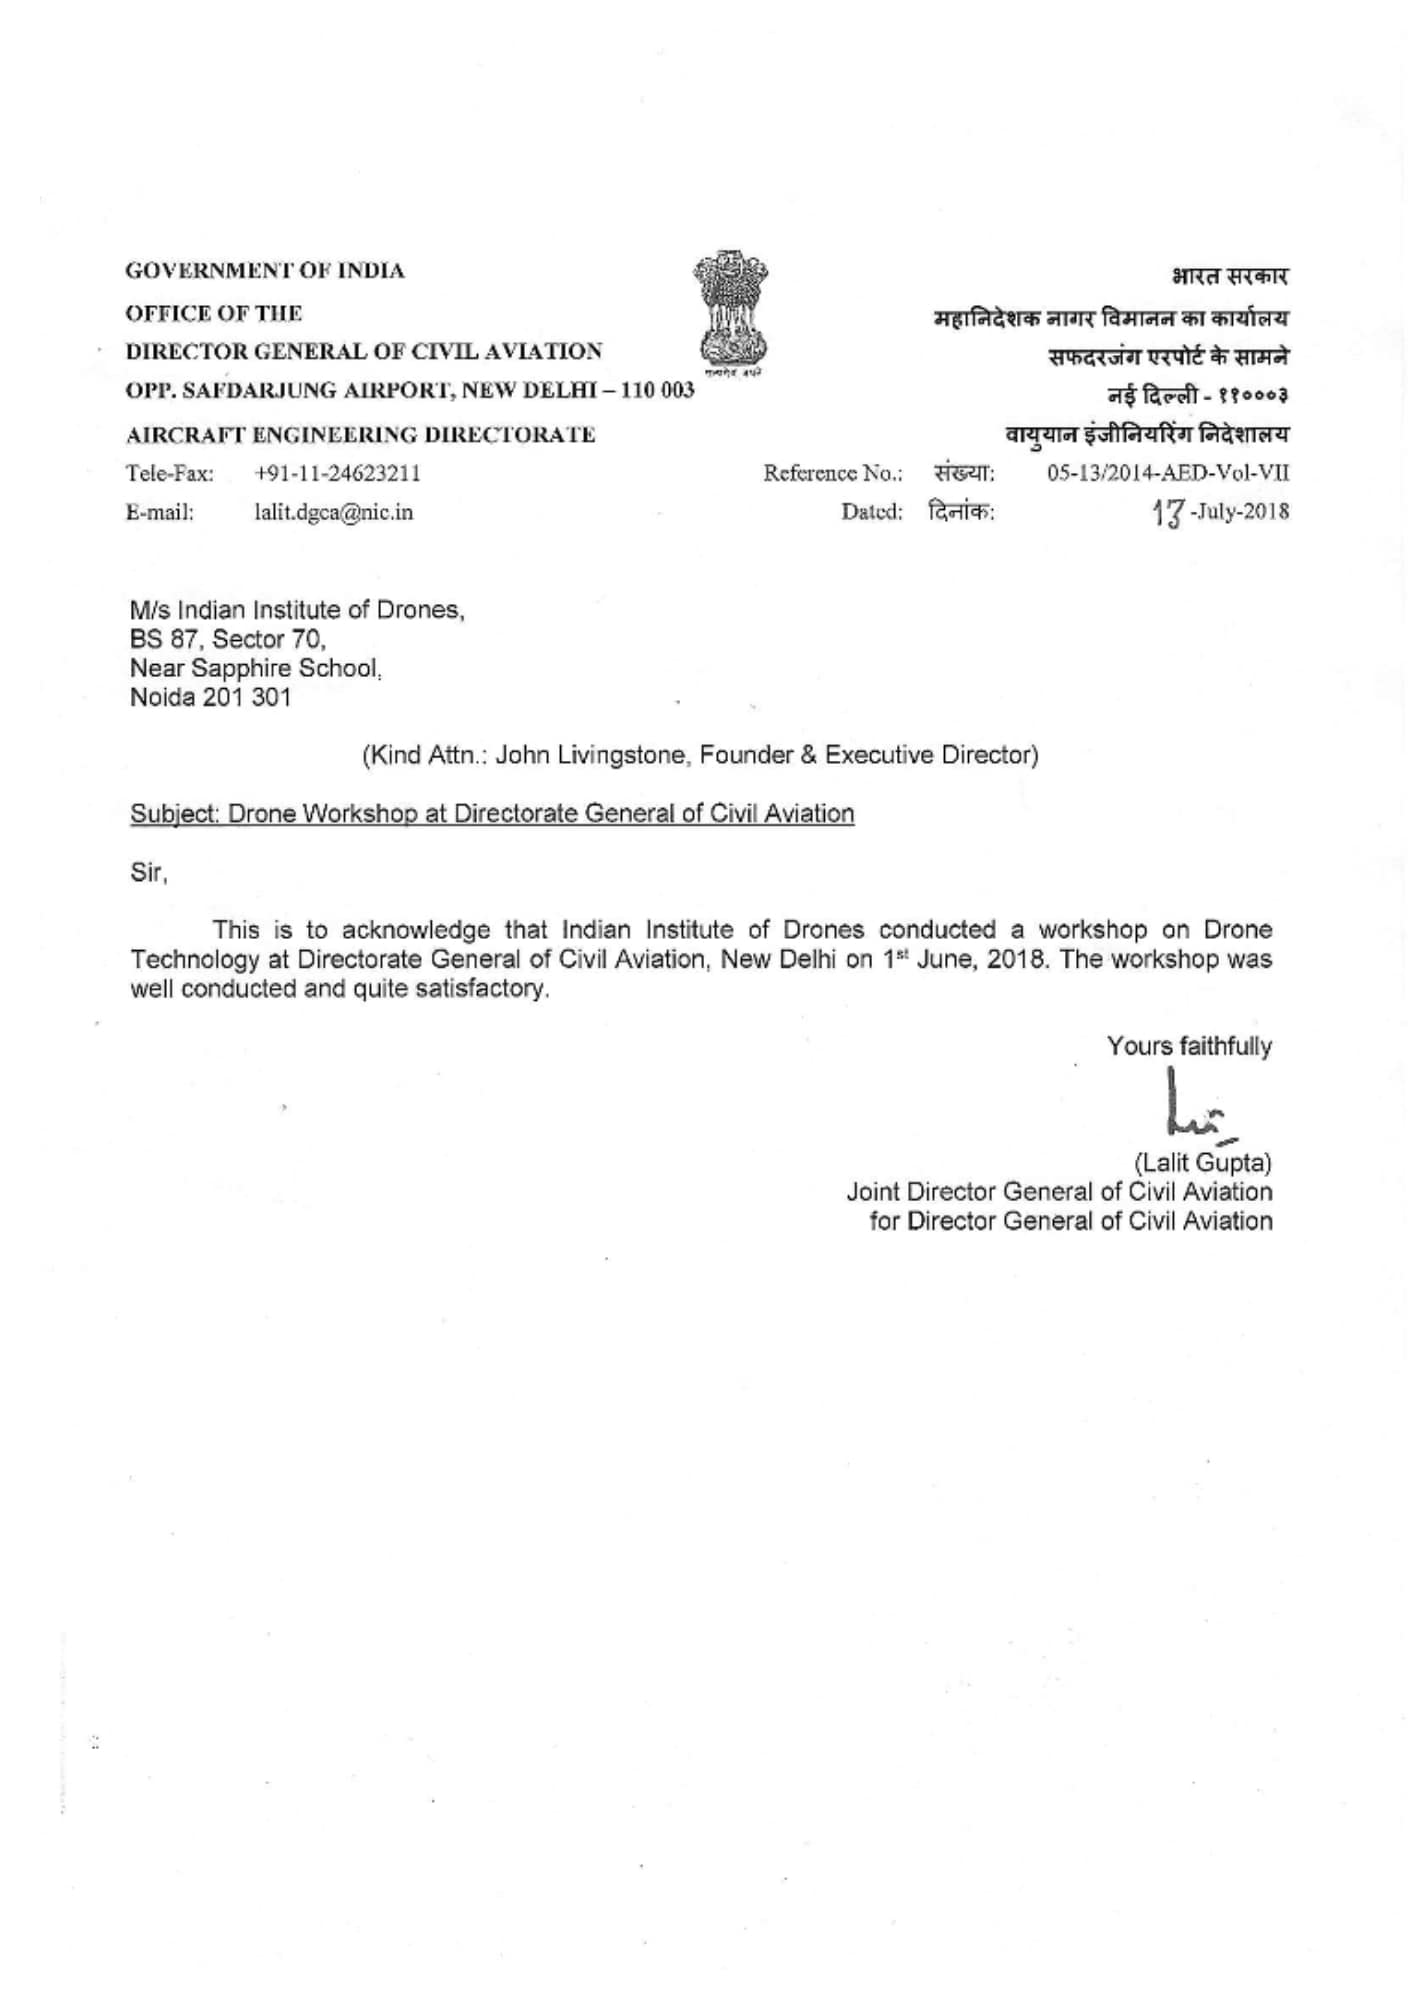 Satisfactory Letter from DGCA